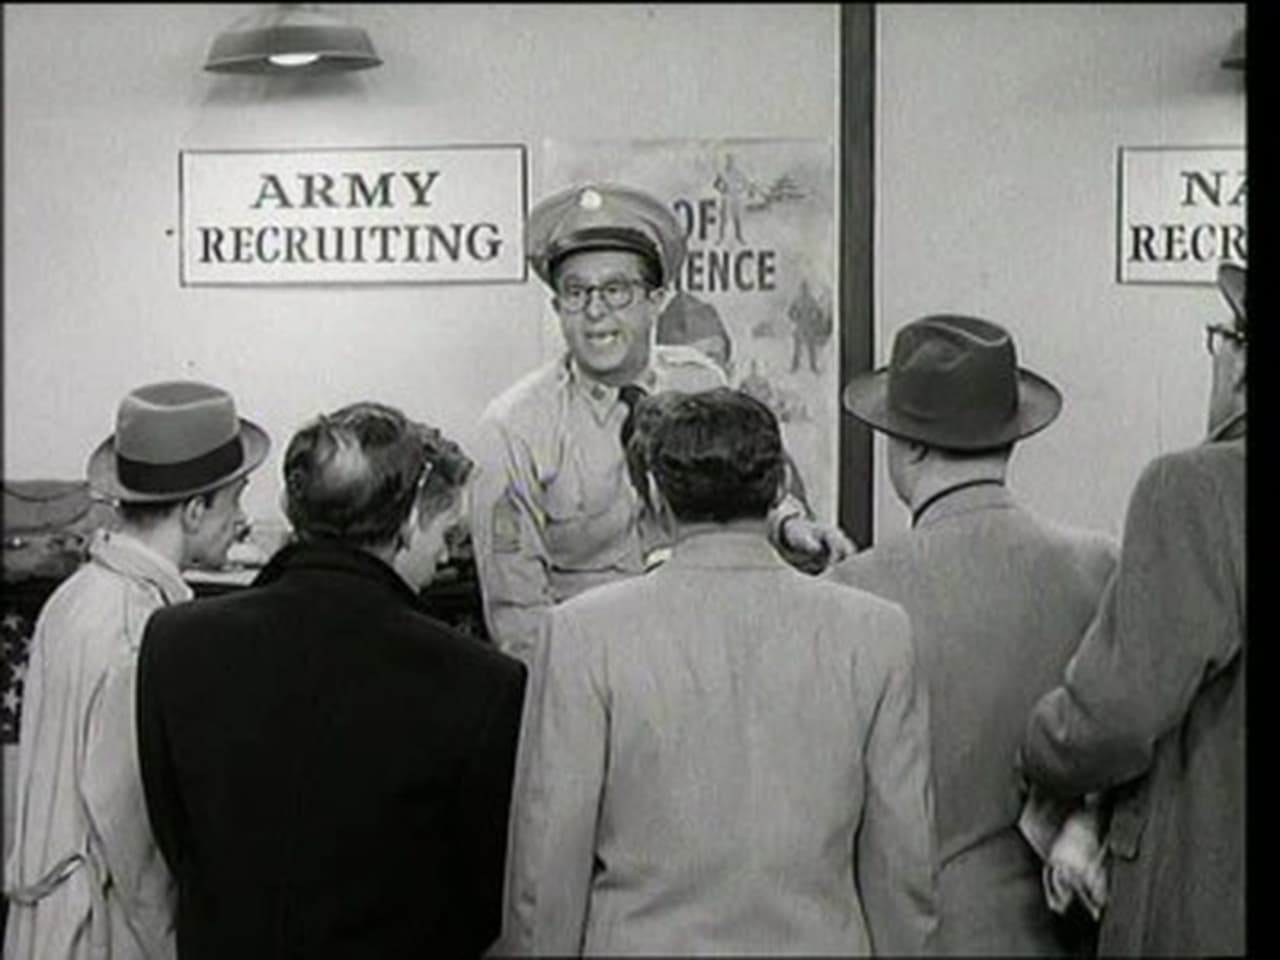 The Phil Silvers Show - Season 1 Episode 30 : The Recruiting Sergeant